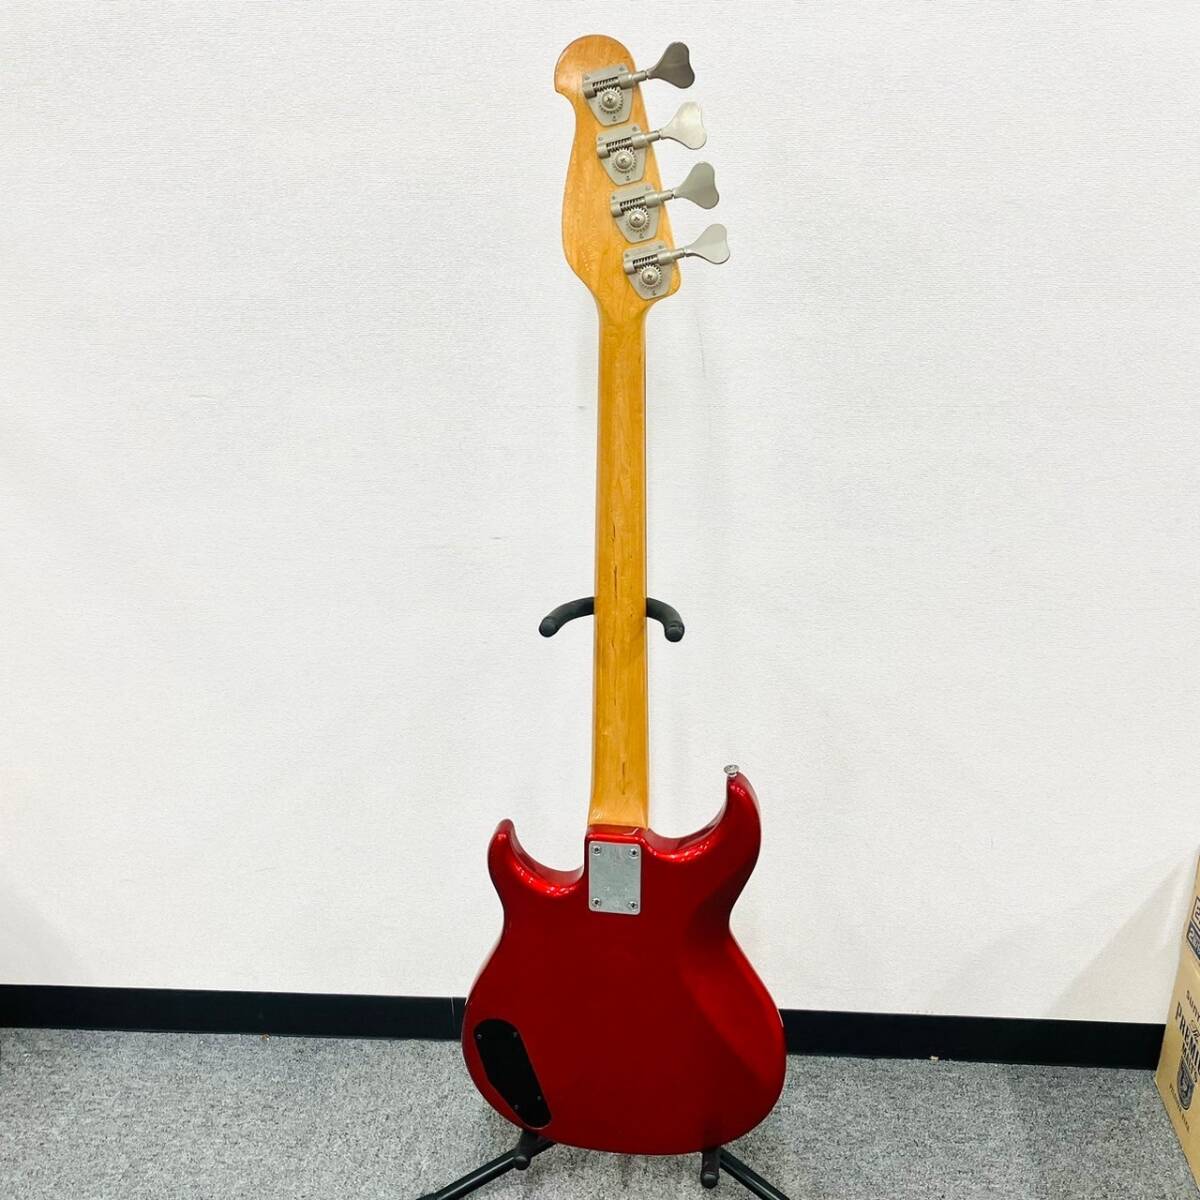 G243-Z1-1284 ^ YAMAHA Yamaha BBVIS electric bass body electrification / sound out has confirmed red color stringed instruments guitar base musical instruments ②